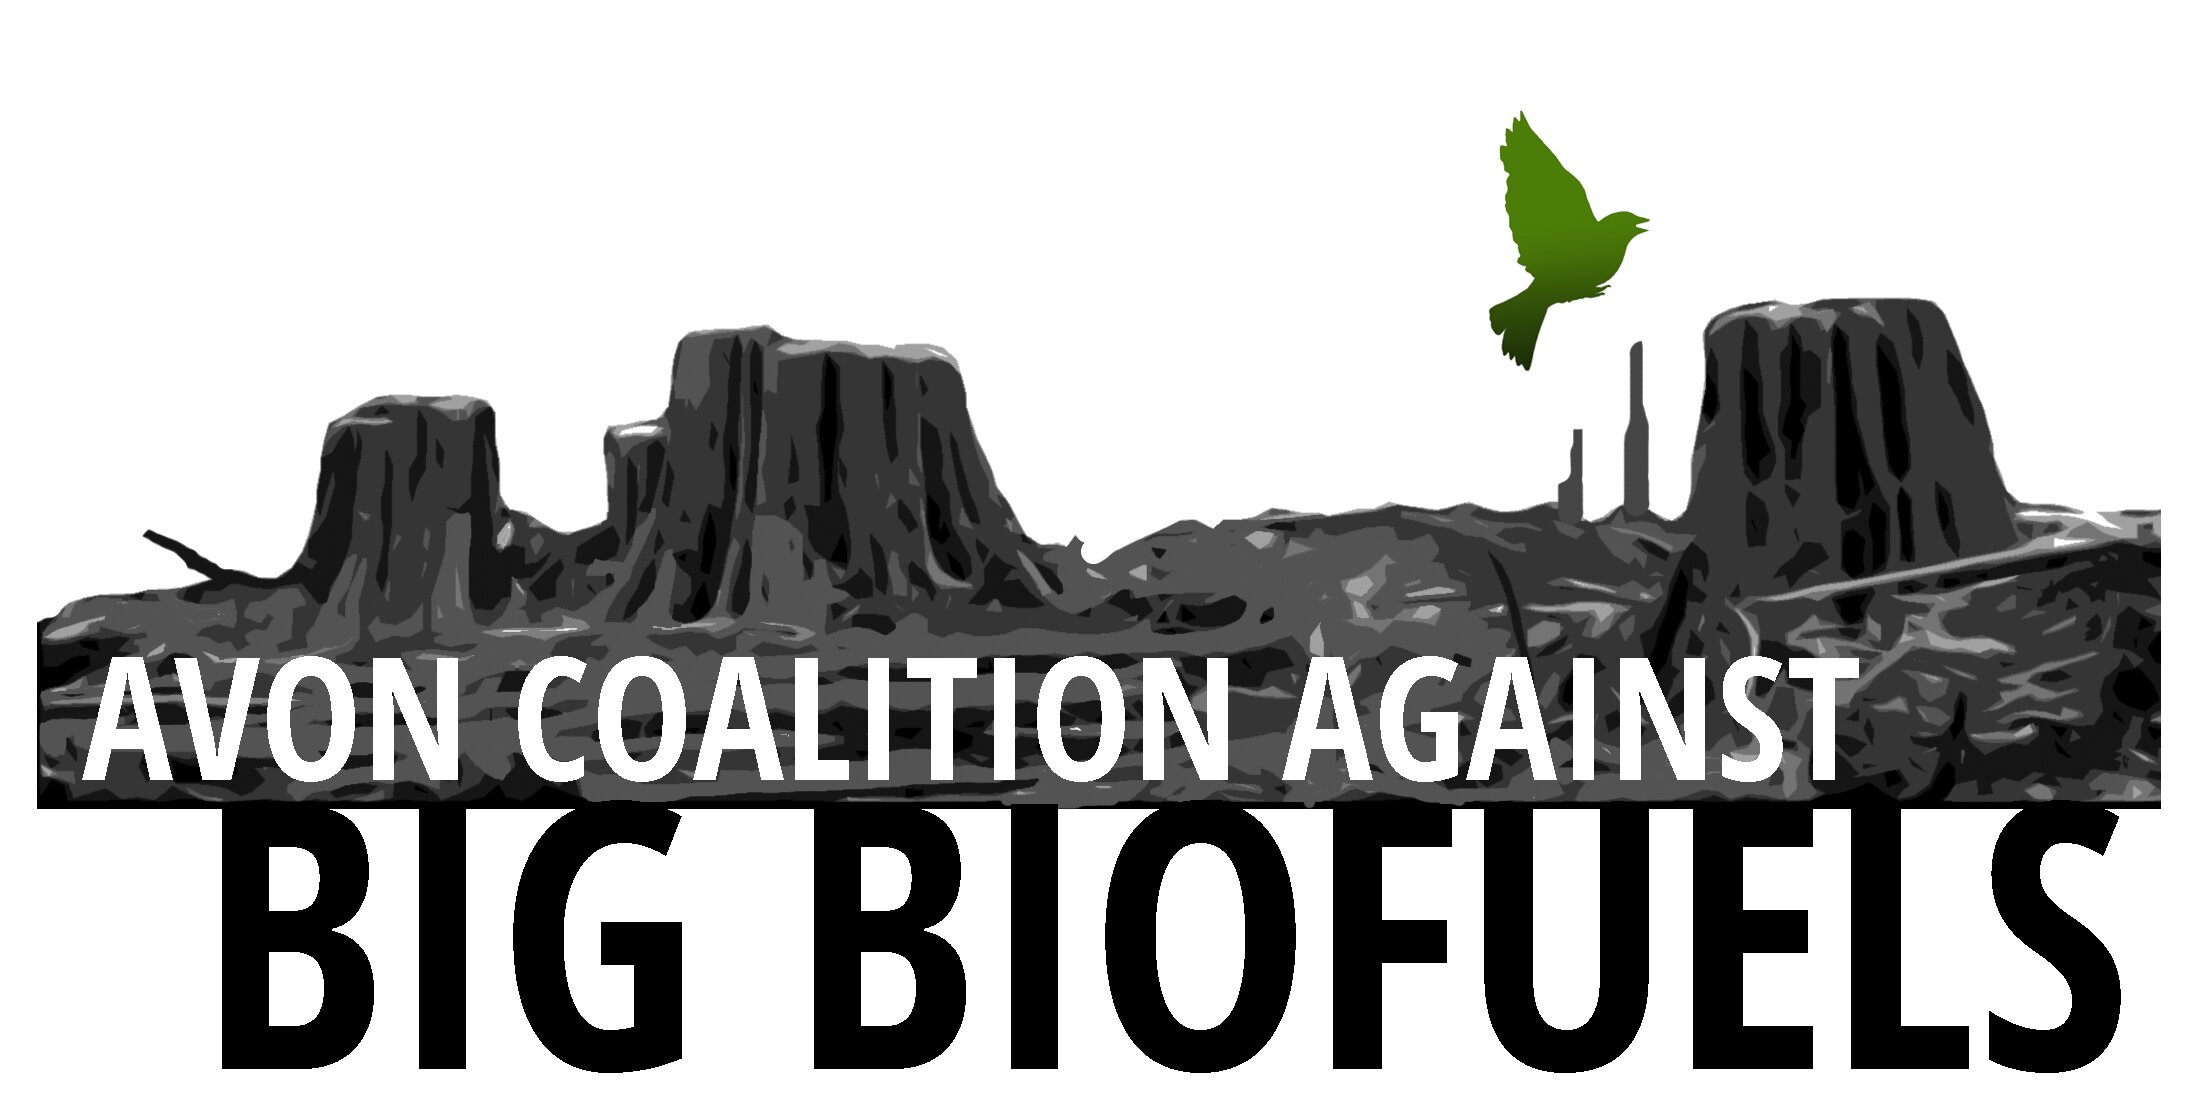 We oppose big biofuels projects including the Helius, W4B, Nexttera Power Stations proposed for Avonmouth because of their social and environmental harm.